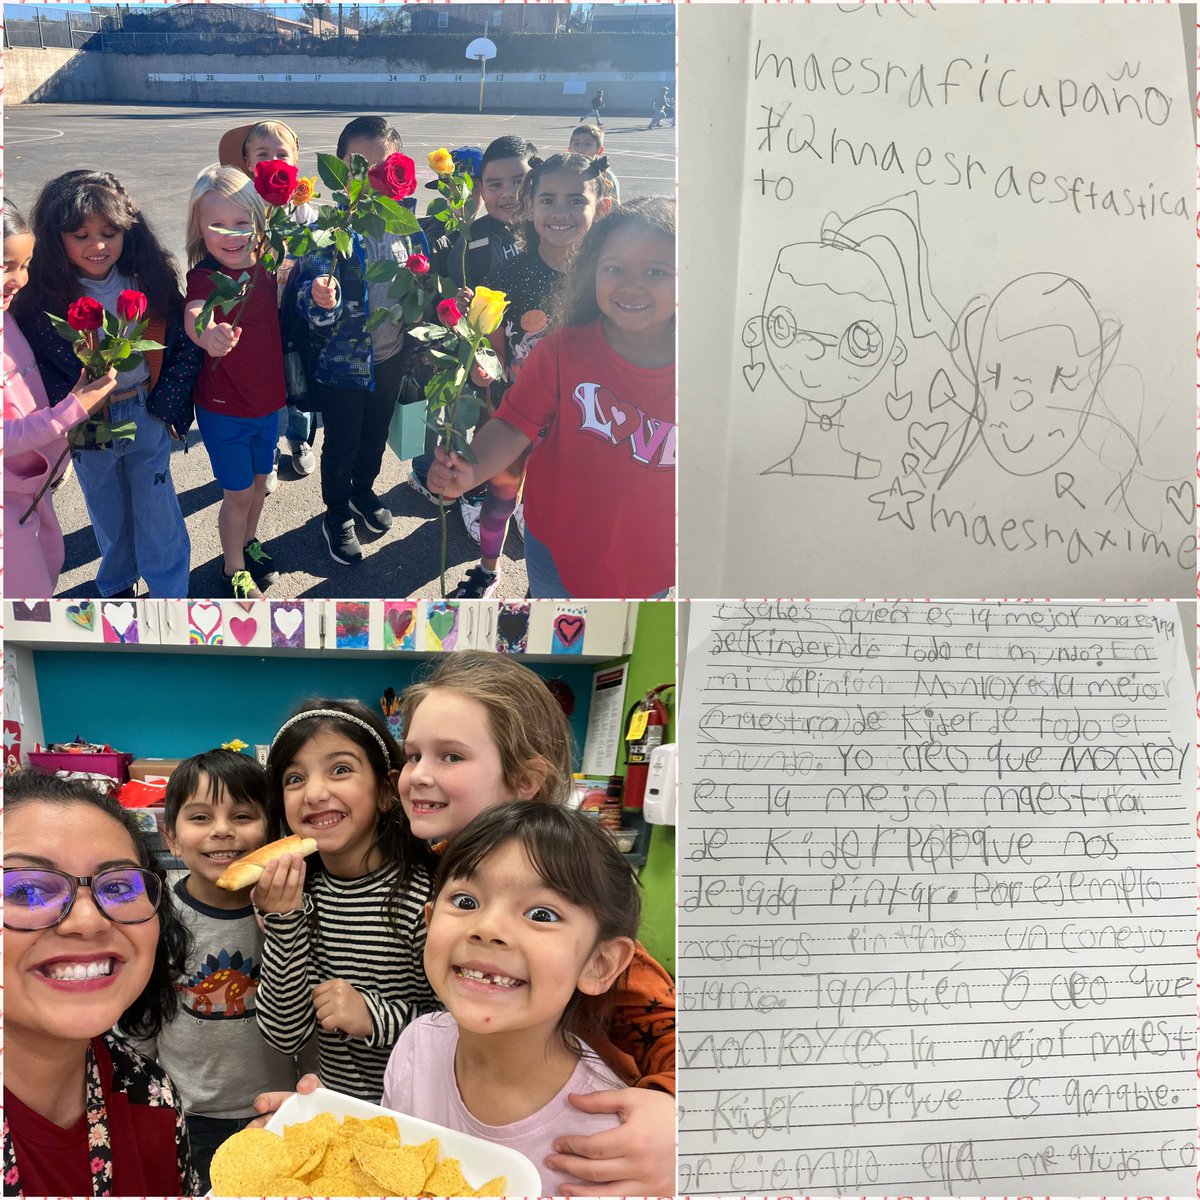 Spent my birthday with my favorite people in the whole world… my students<3 Past & present students surprised me with flowers, nachos, cards,& even an opinion writing piece about me! Love my lobo community! @BosLangAcademy @MtraRamosR @Maestra_VRocha @Danya_BGlobal @NerelWinter